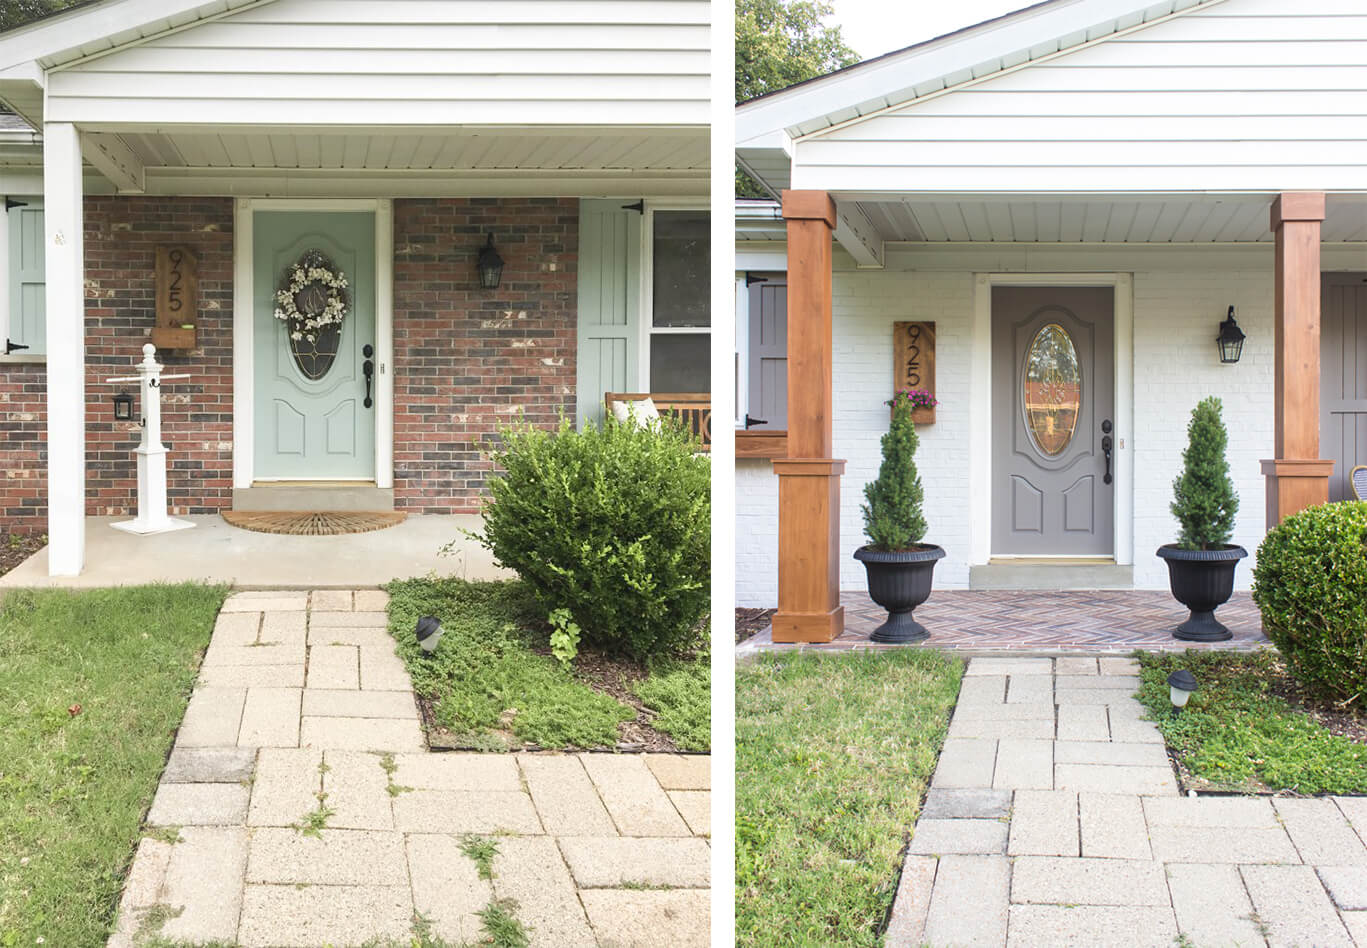 Total Porch Makeover from Columns to Colors